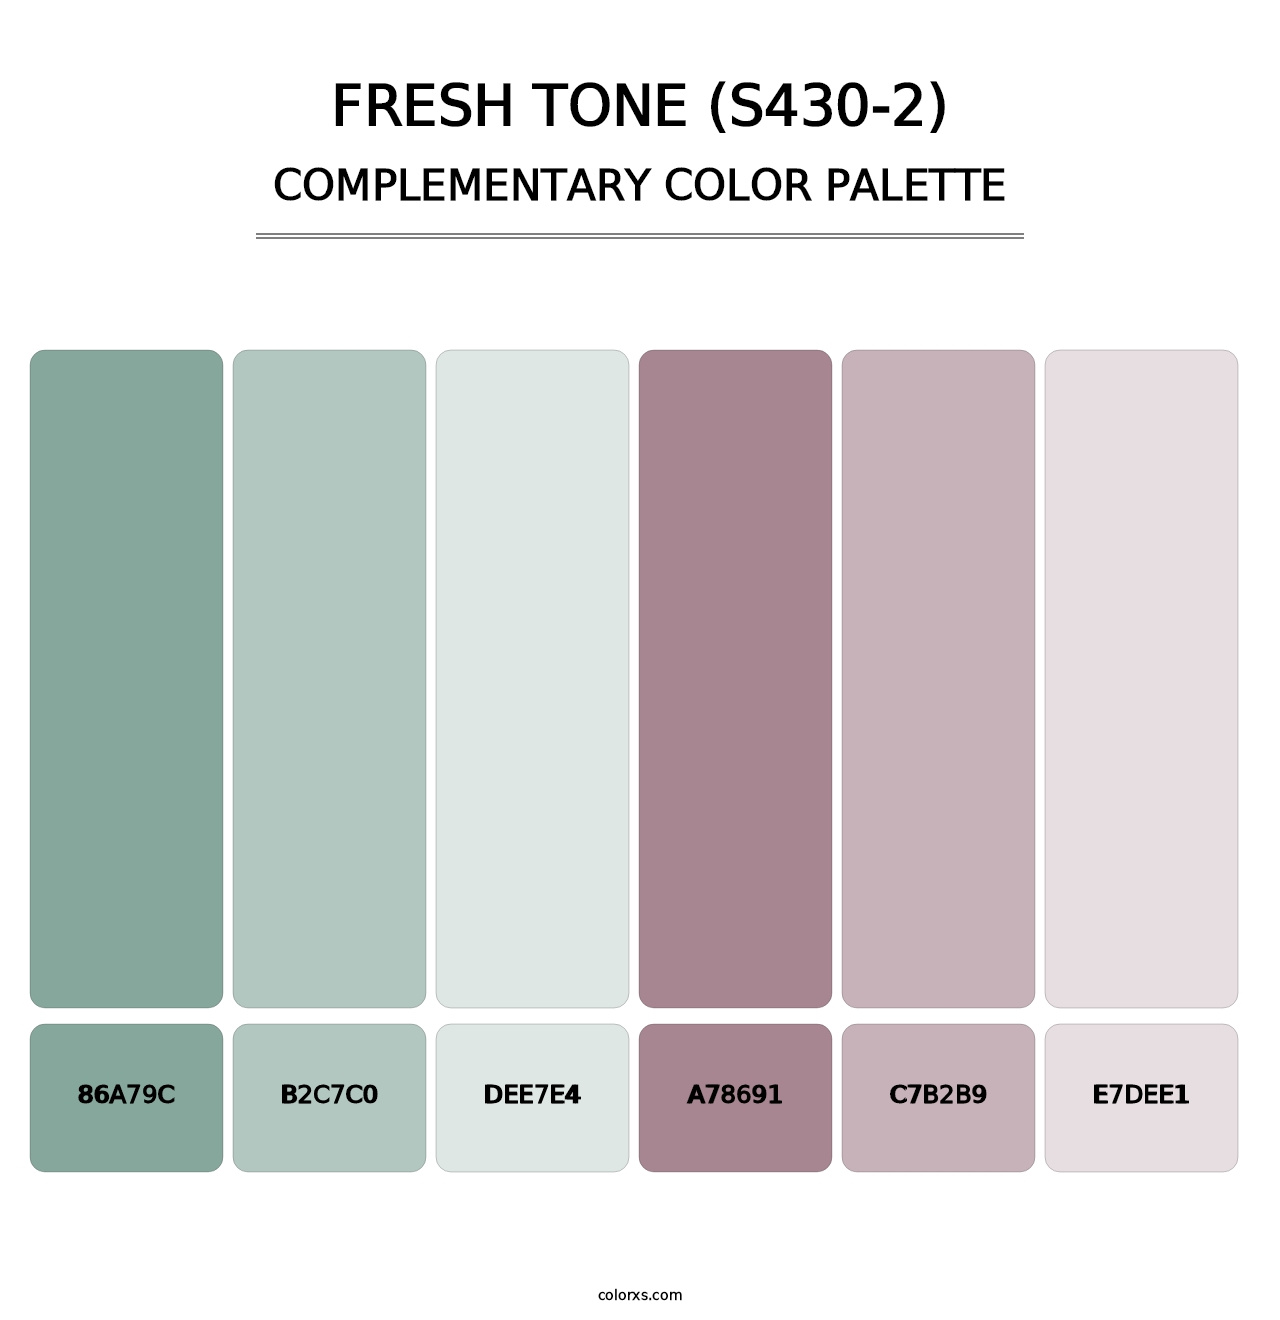 Fresh Tone (S430-2) - Complementary Color Palette